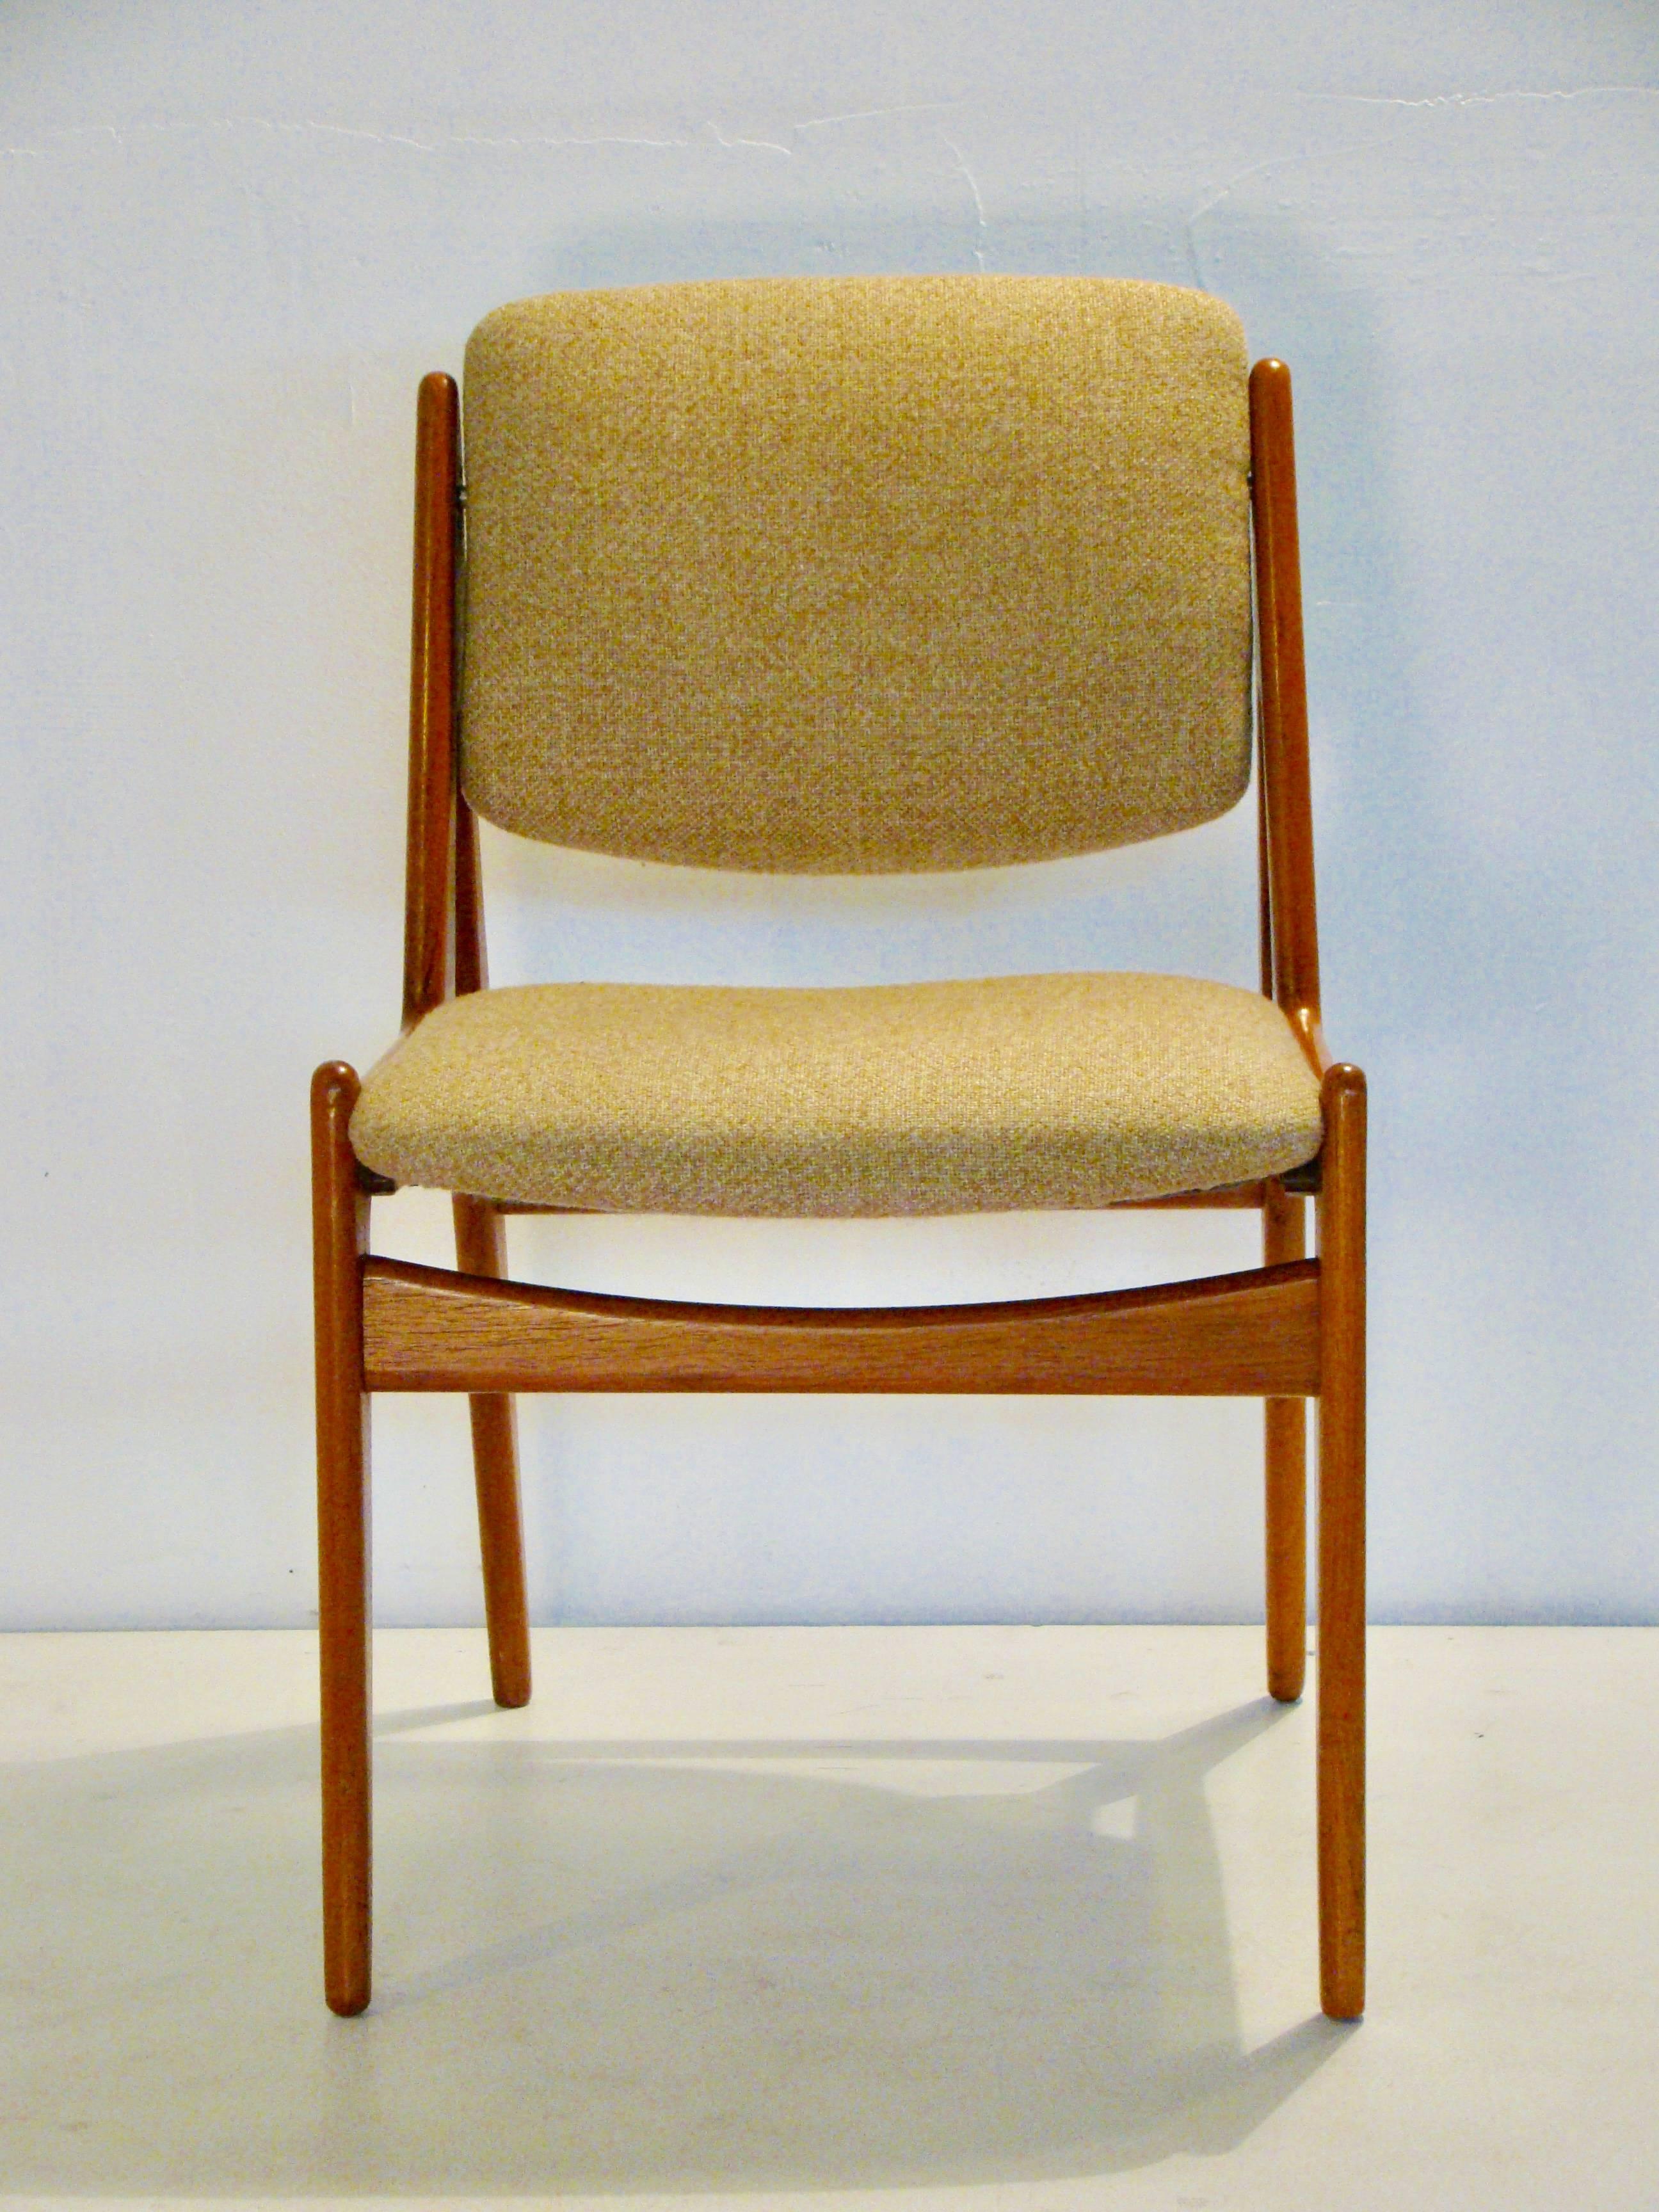 A very nice 'set of six' teak dining chairs by Arne Vodder. The "Ella" chair. Backrest incorporates a tilt feature for casual comfort. Beautiful chairs, very nice condition, solid construction with no previous repairs and none required.